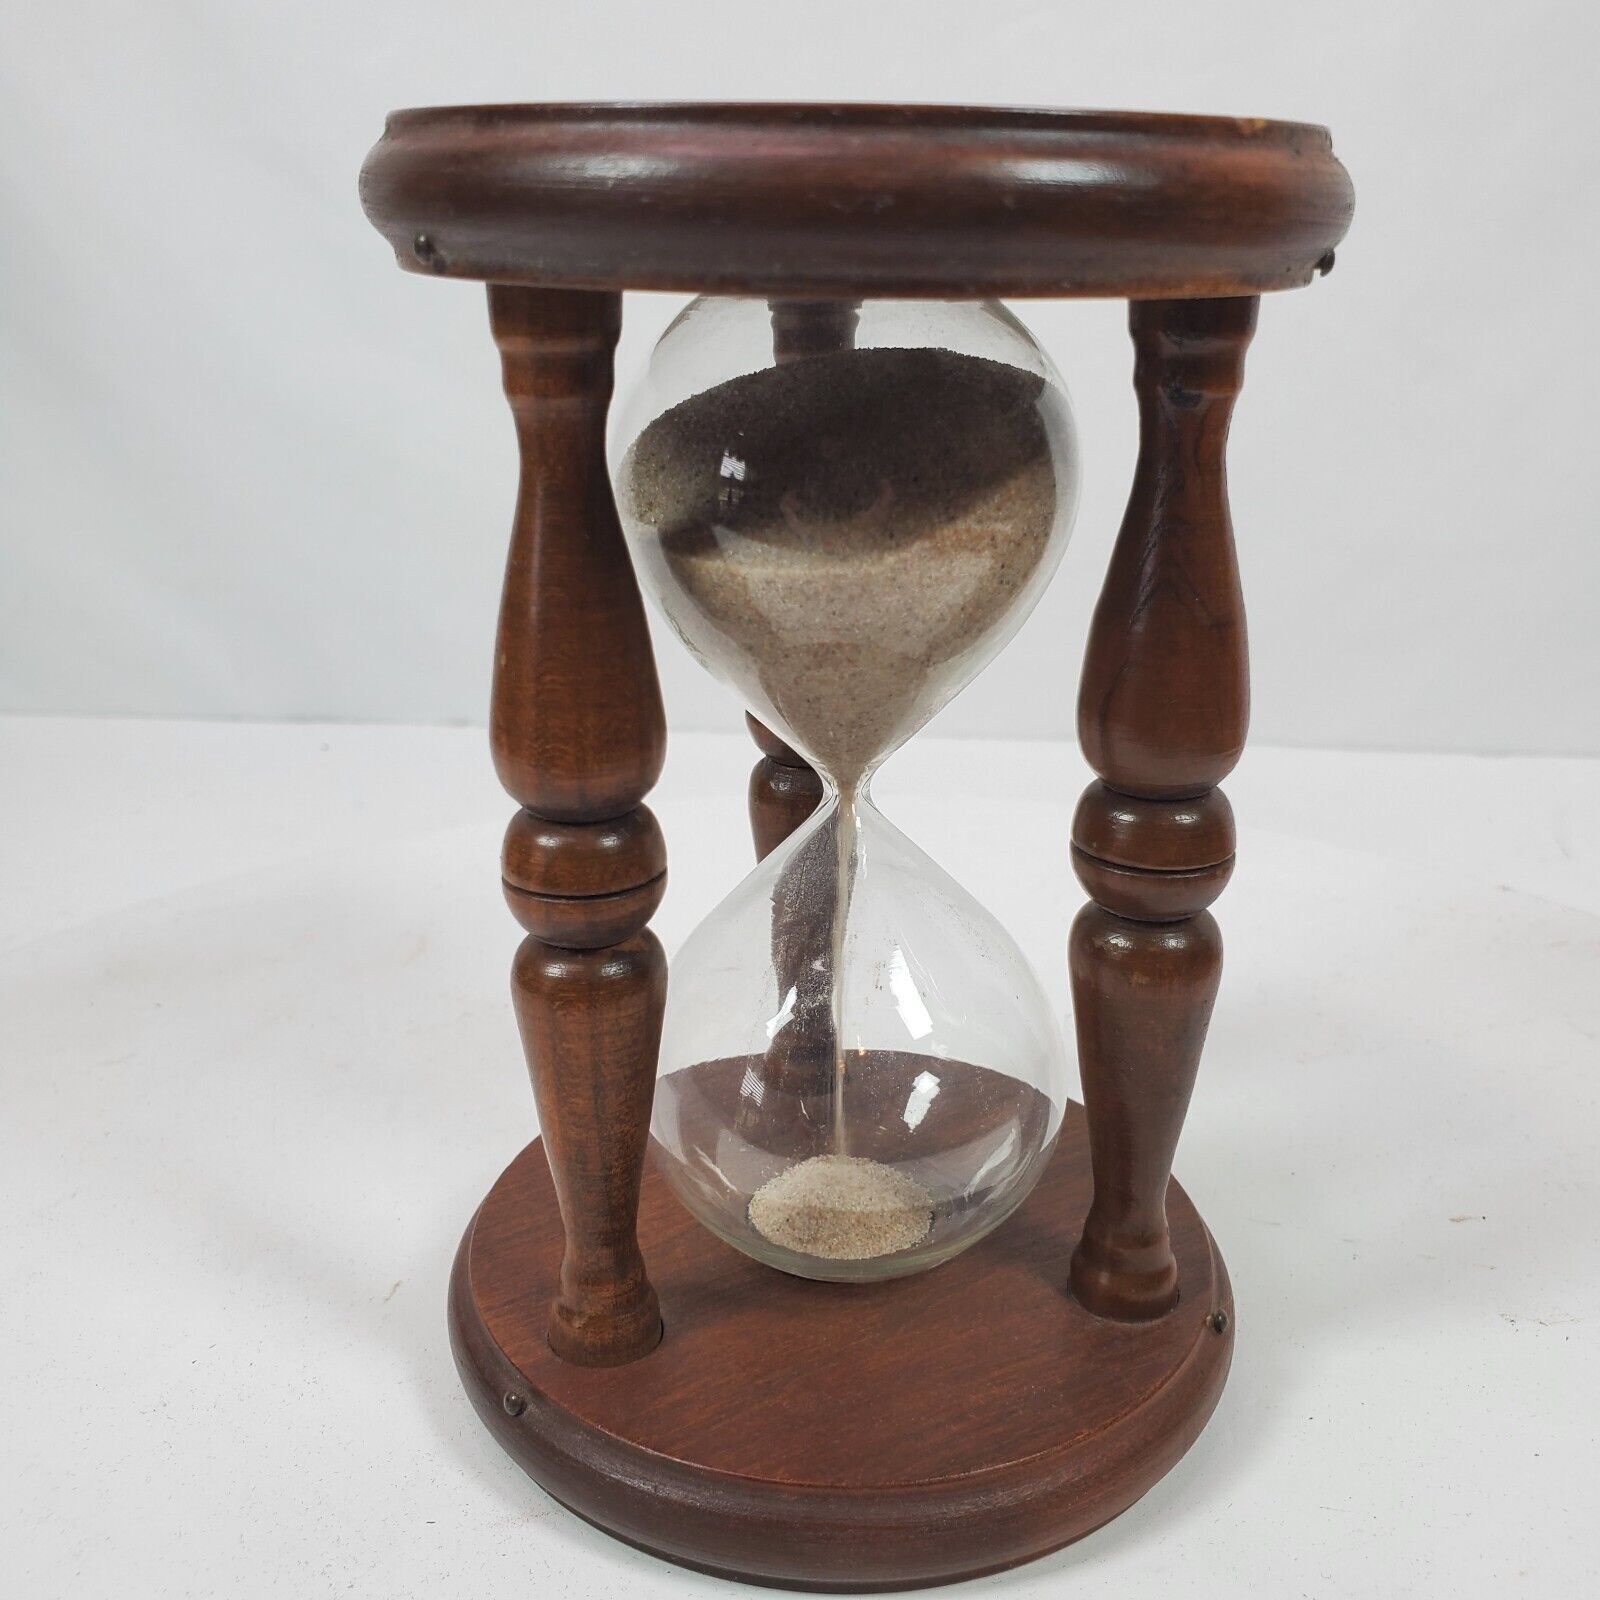 Vintage Sand Egg Timer 3 Hours 15 Seconds Wood Stand 5.5x3.5 Inch